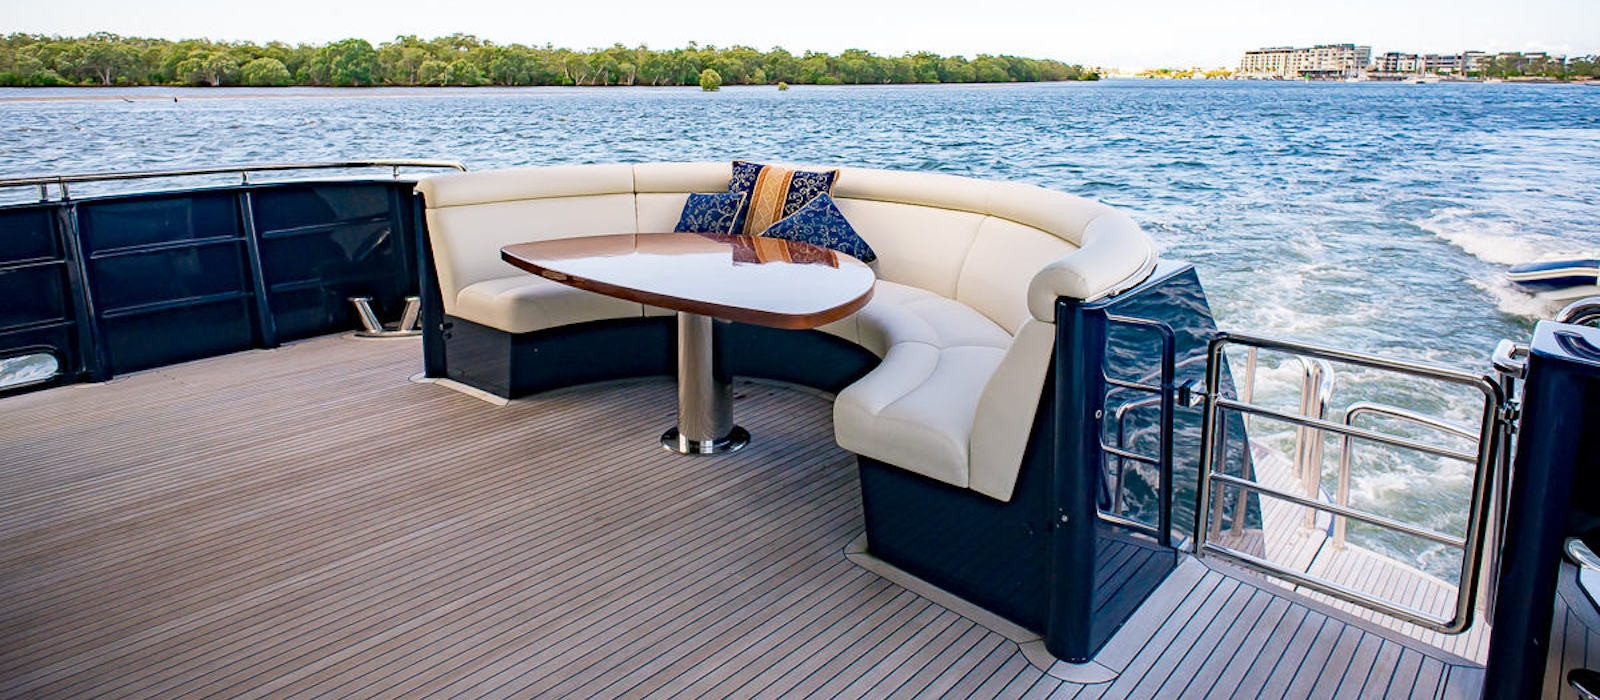 Aft deck lounge available for Patriot 1 super yacht hire 